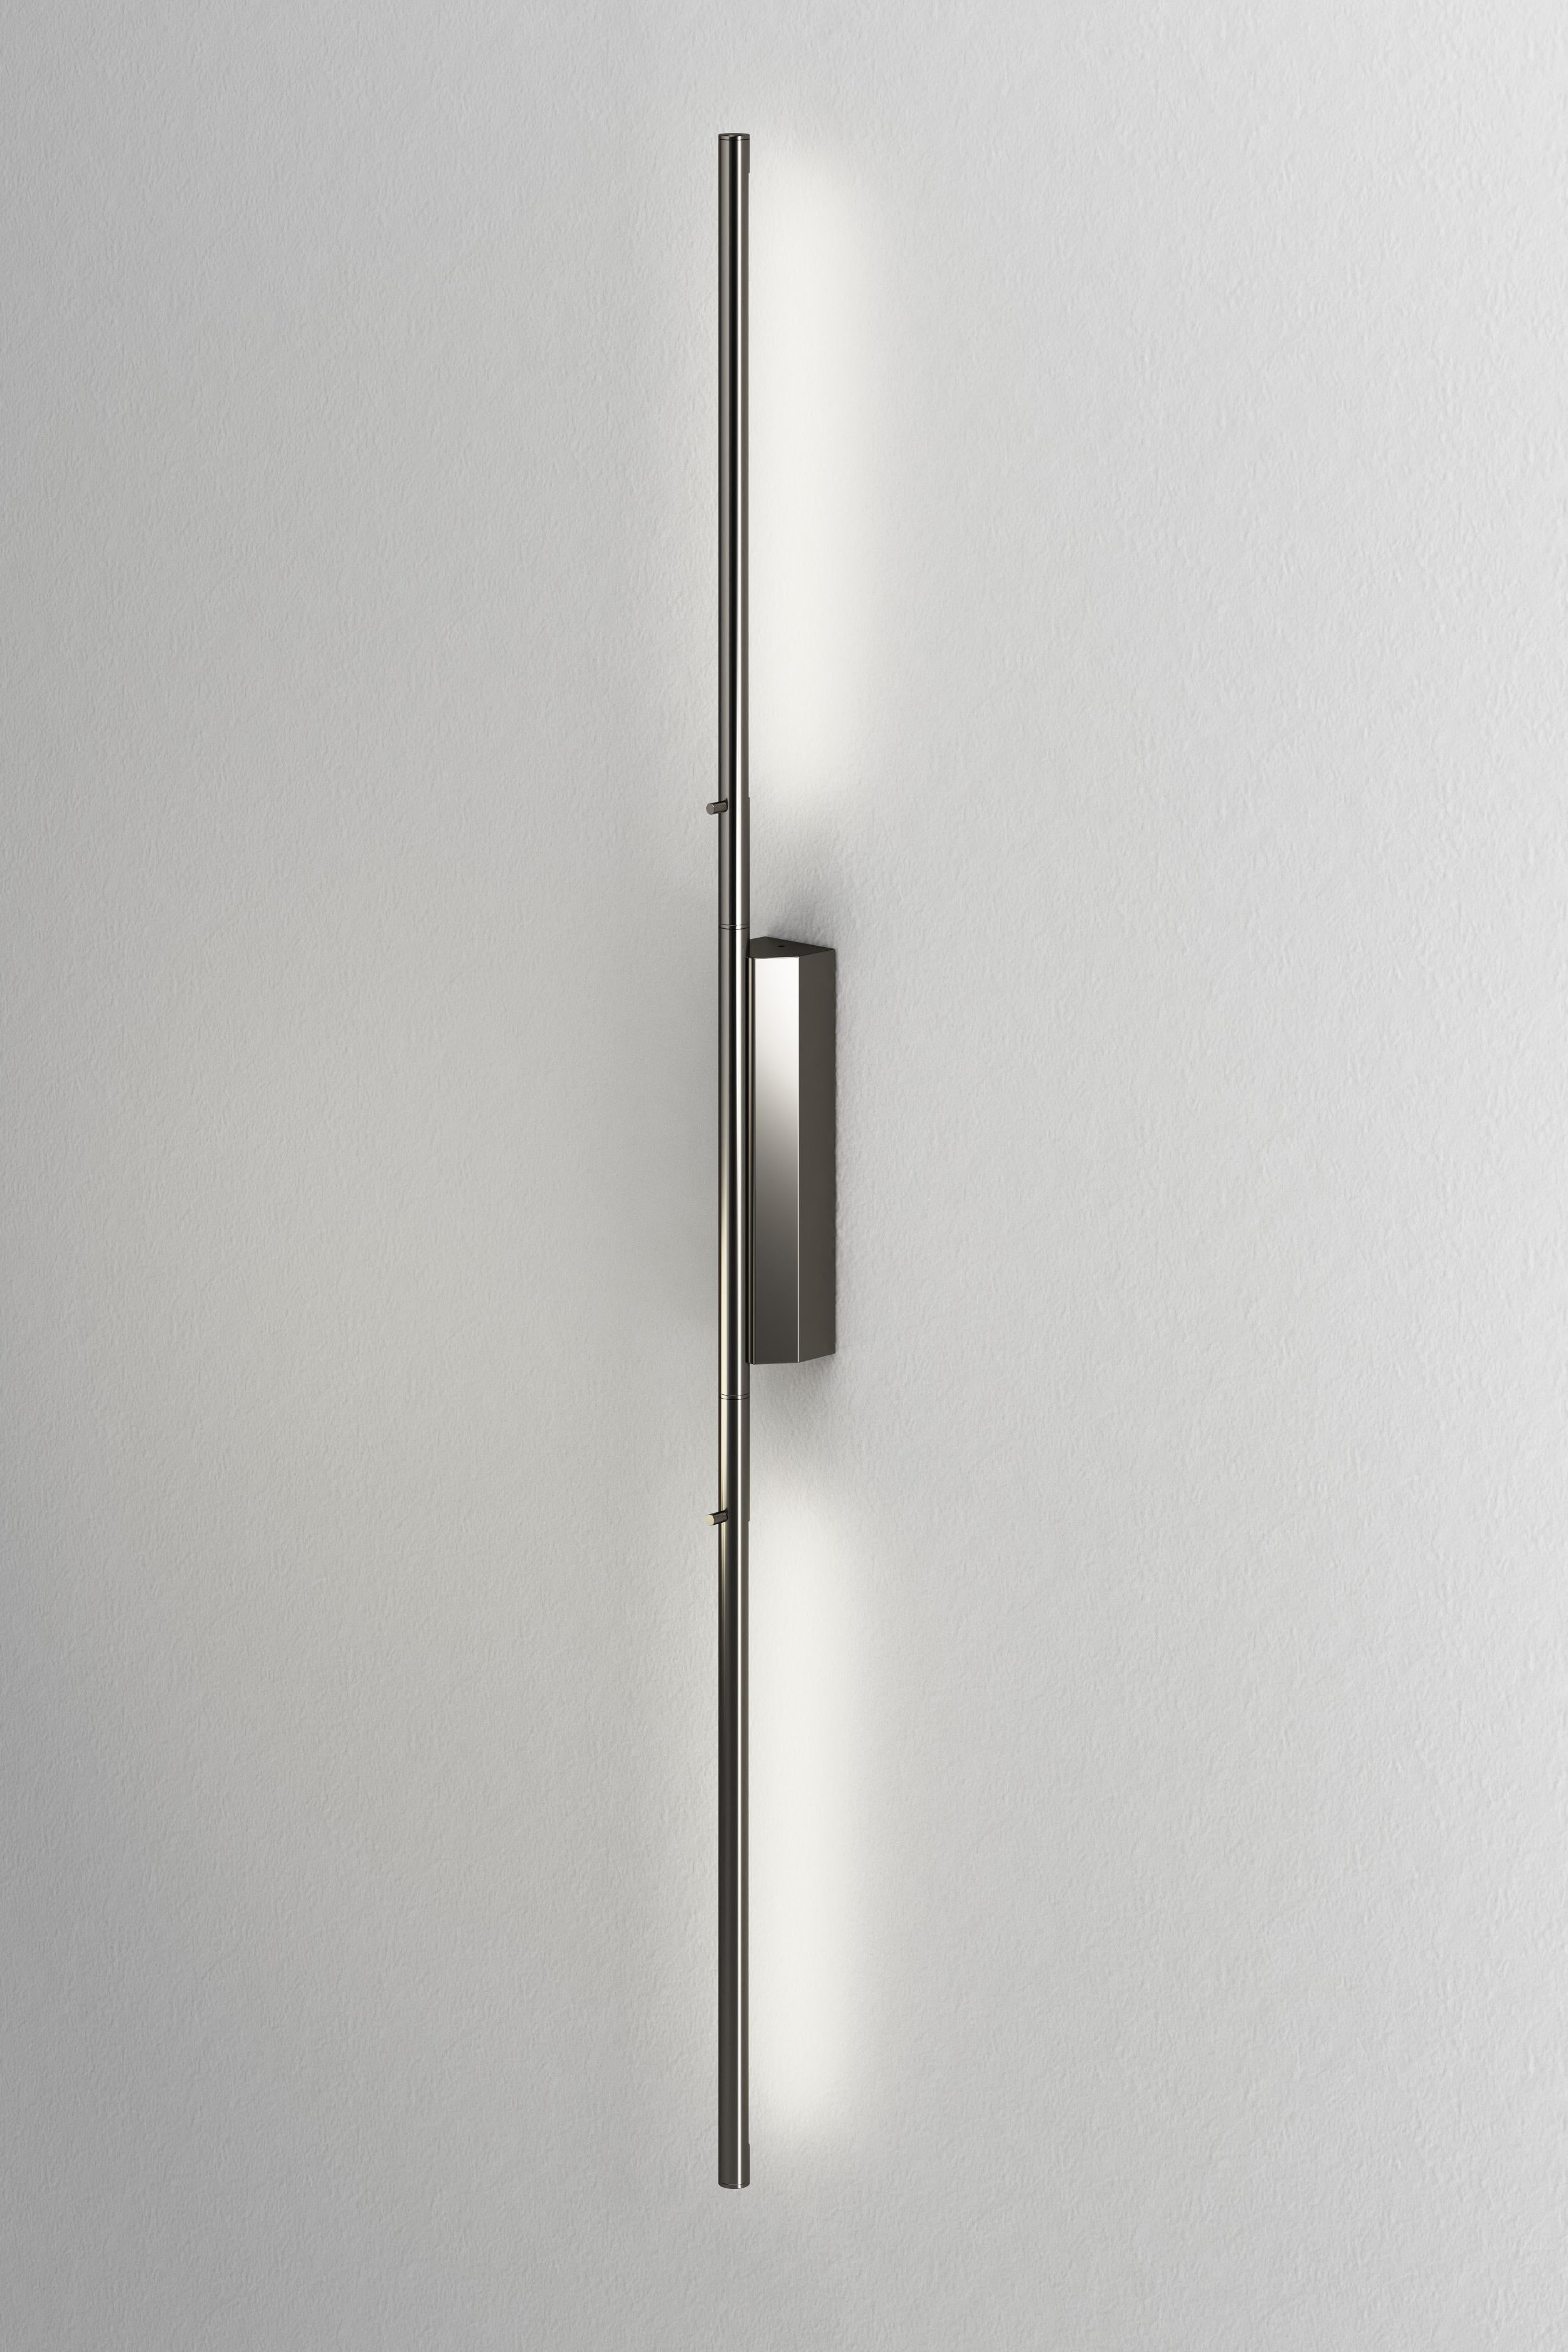 IP Link Double 960 Satin Graphite Wall Light by Emilie Cathelineau
Dimensions: D4.5 x W5 X H96 cm
Materials: Solid brass, Satin Graphite, LED, Polycarbonate.
Others finishes and dimensions are available.

All our lamps can be wired according to